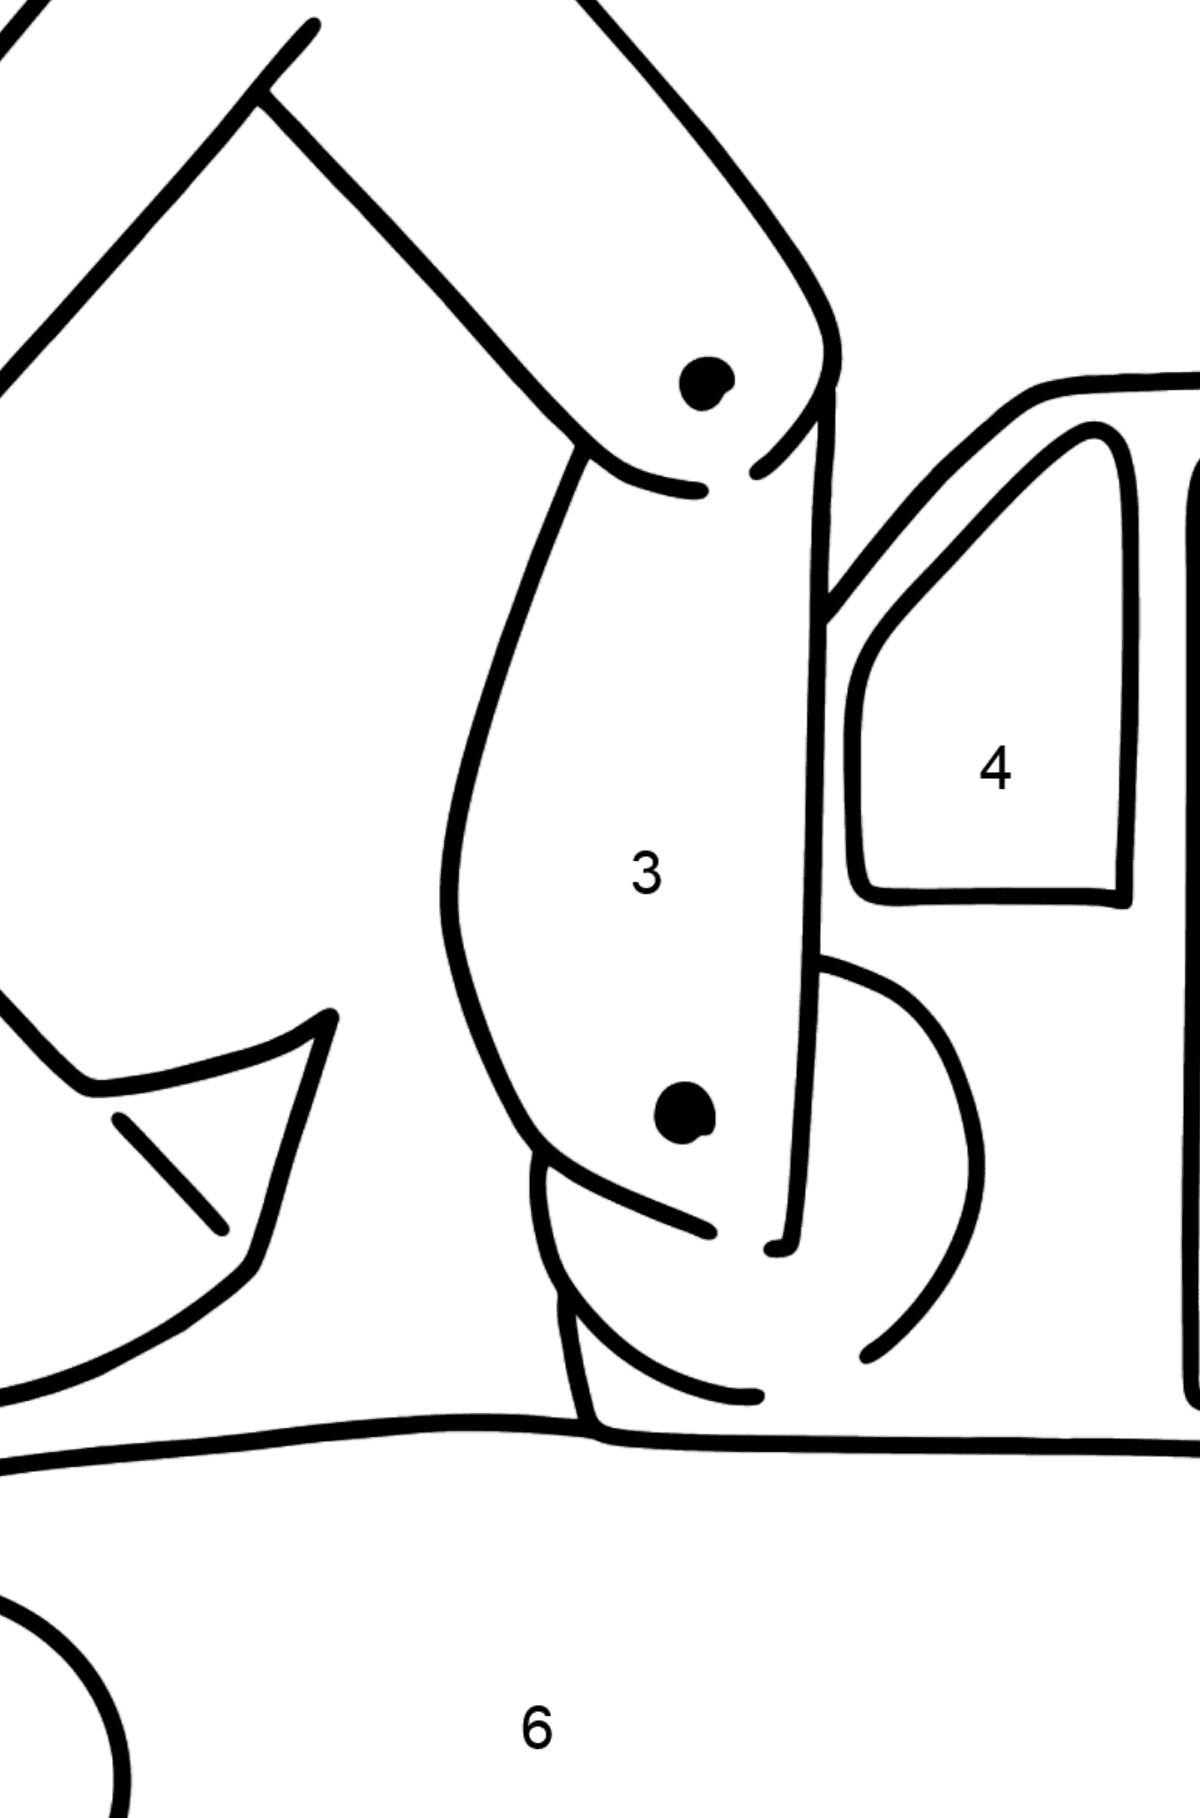 Tractor excavator coloring pages for kids - Coloring by Numbers for Kids